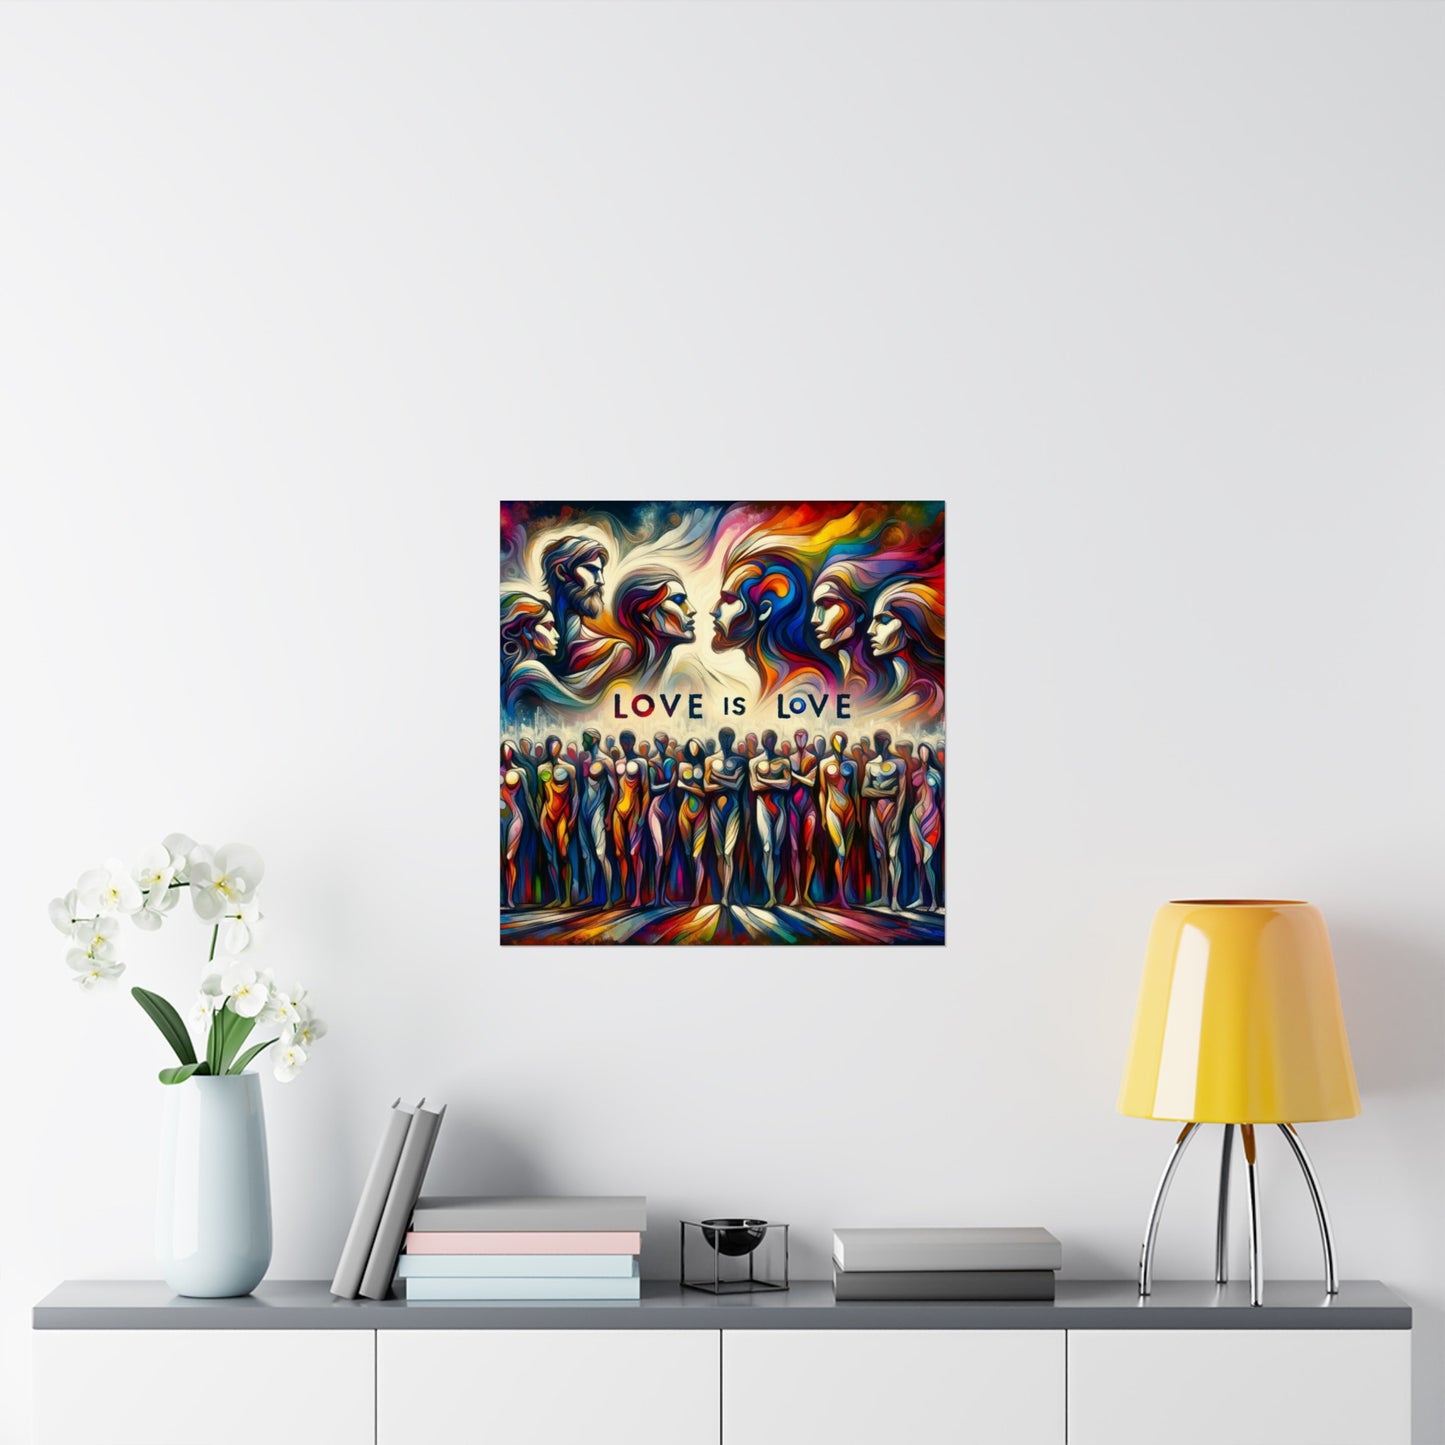 Gorgeous Statement Wall Art Poster: Love is Love! Expressionist Style Emotional Piece